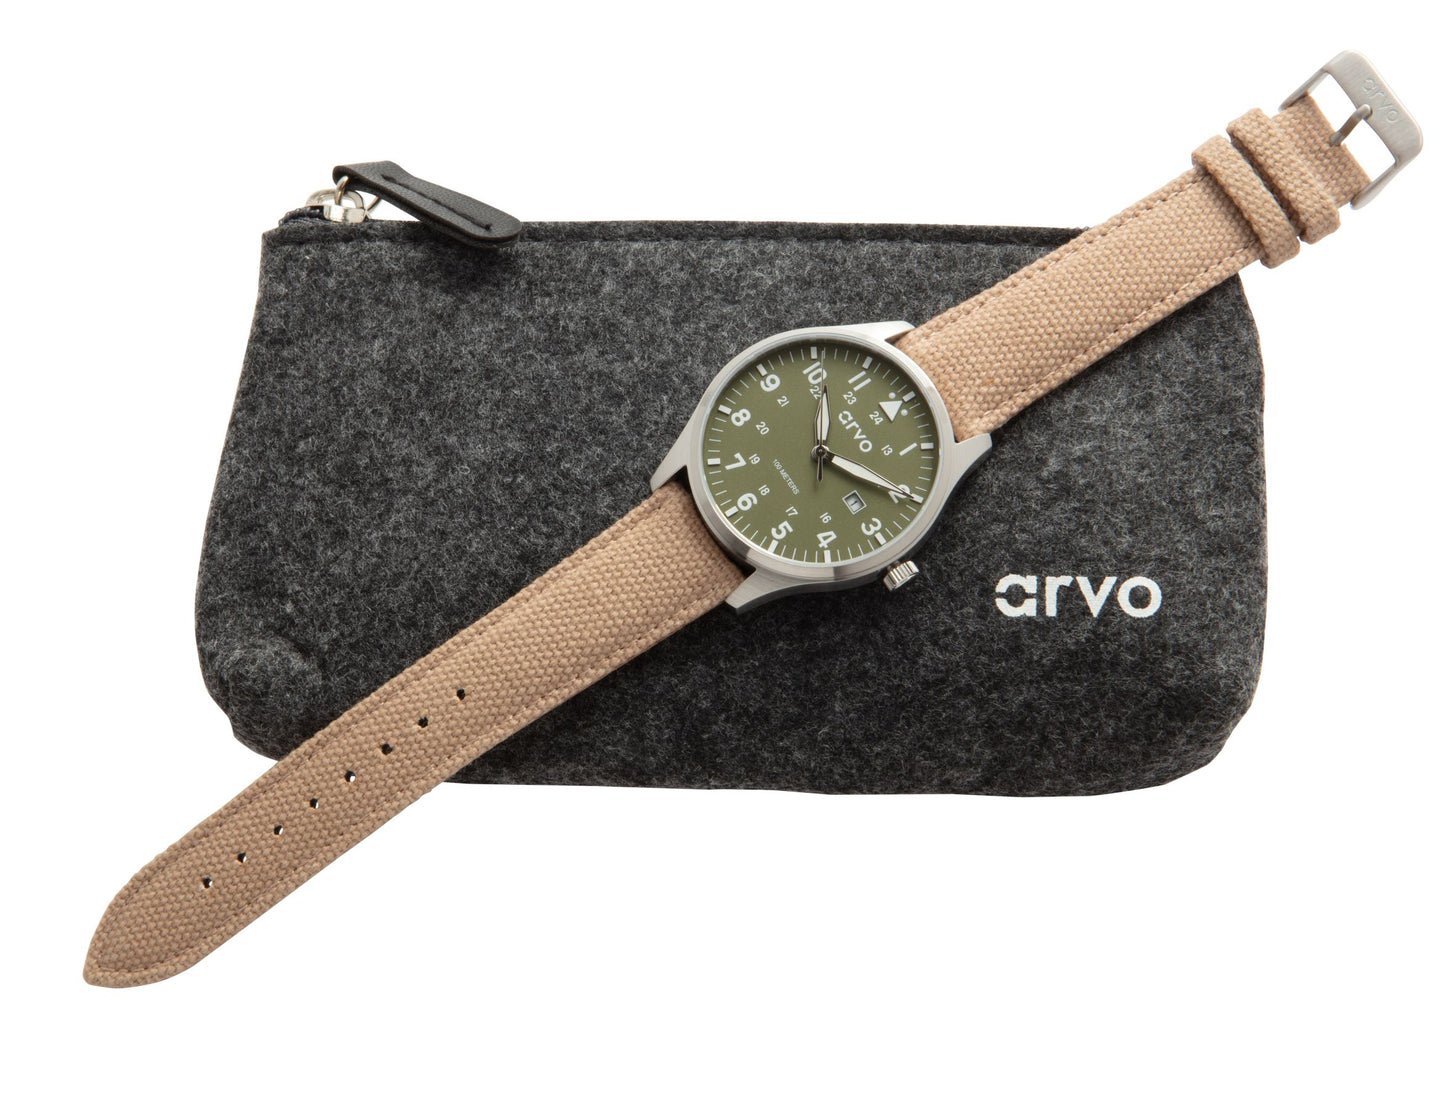 Arvo Rove Field Watch for men with a spring green dial and khaki canvas strap laying on an Arvo gray felt storage pouch